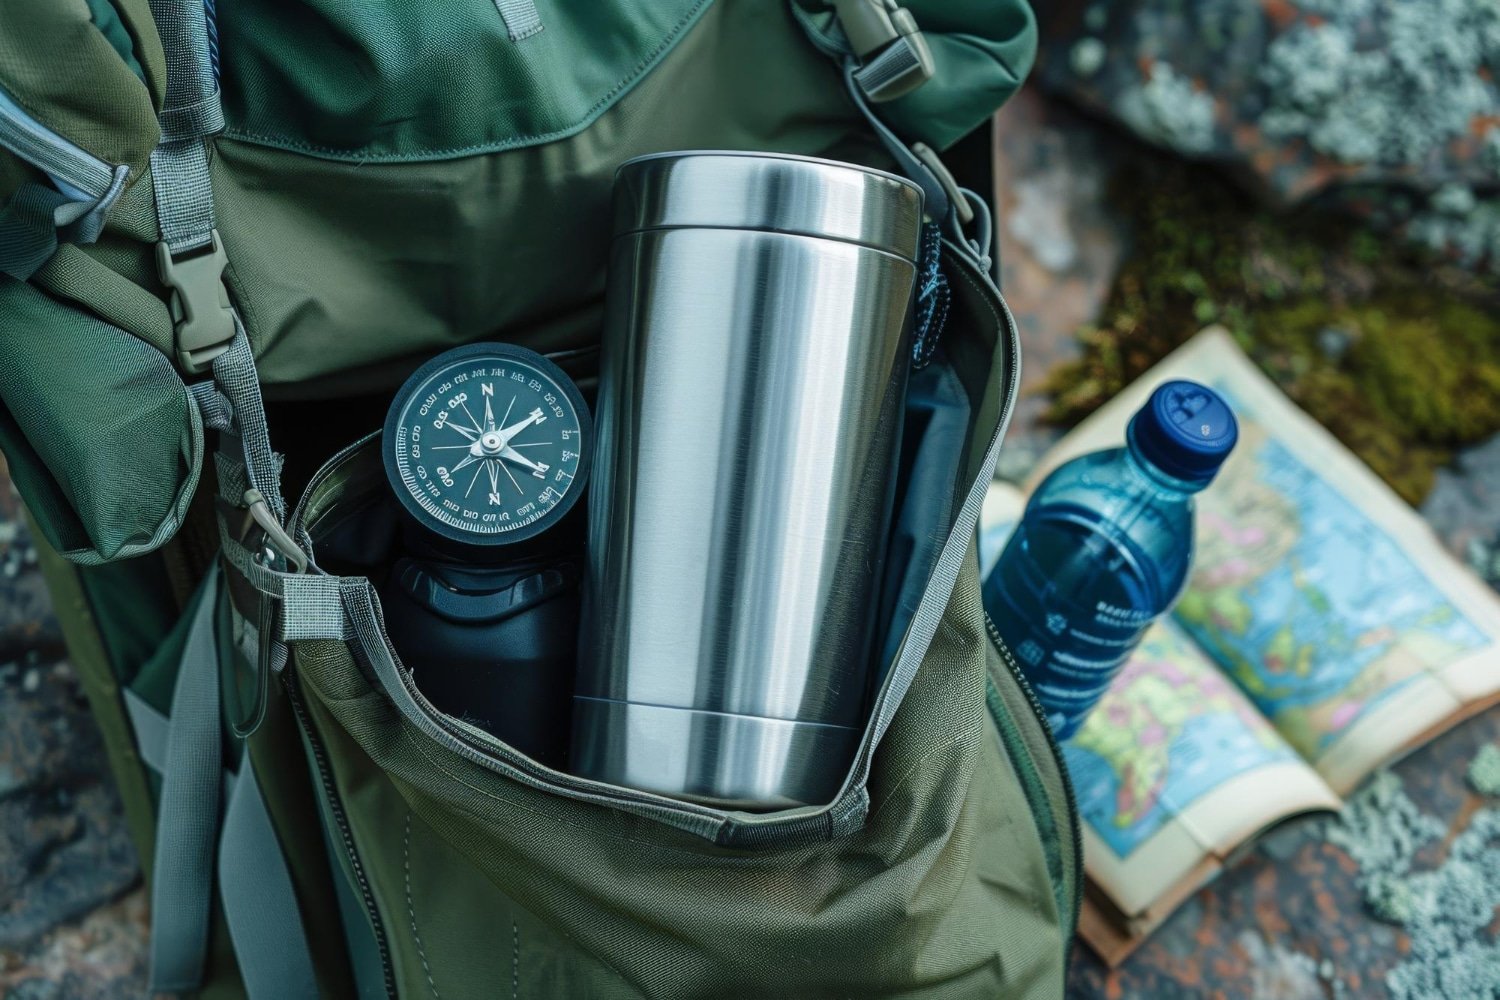 Stanley Adventure-Ready Gear for the Outdoors